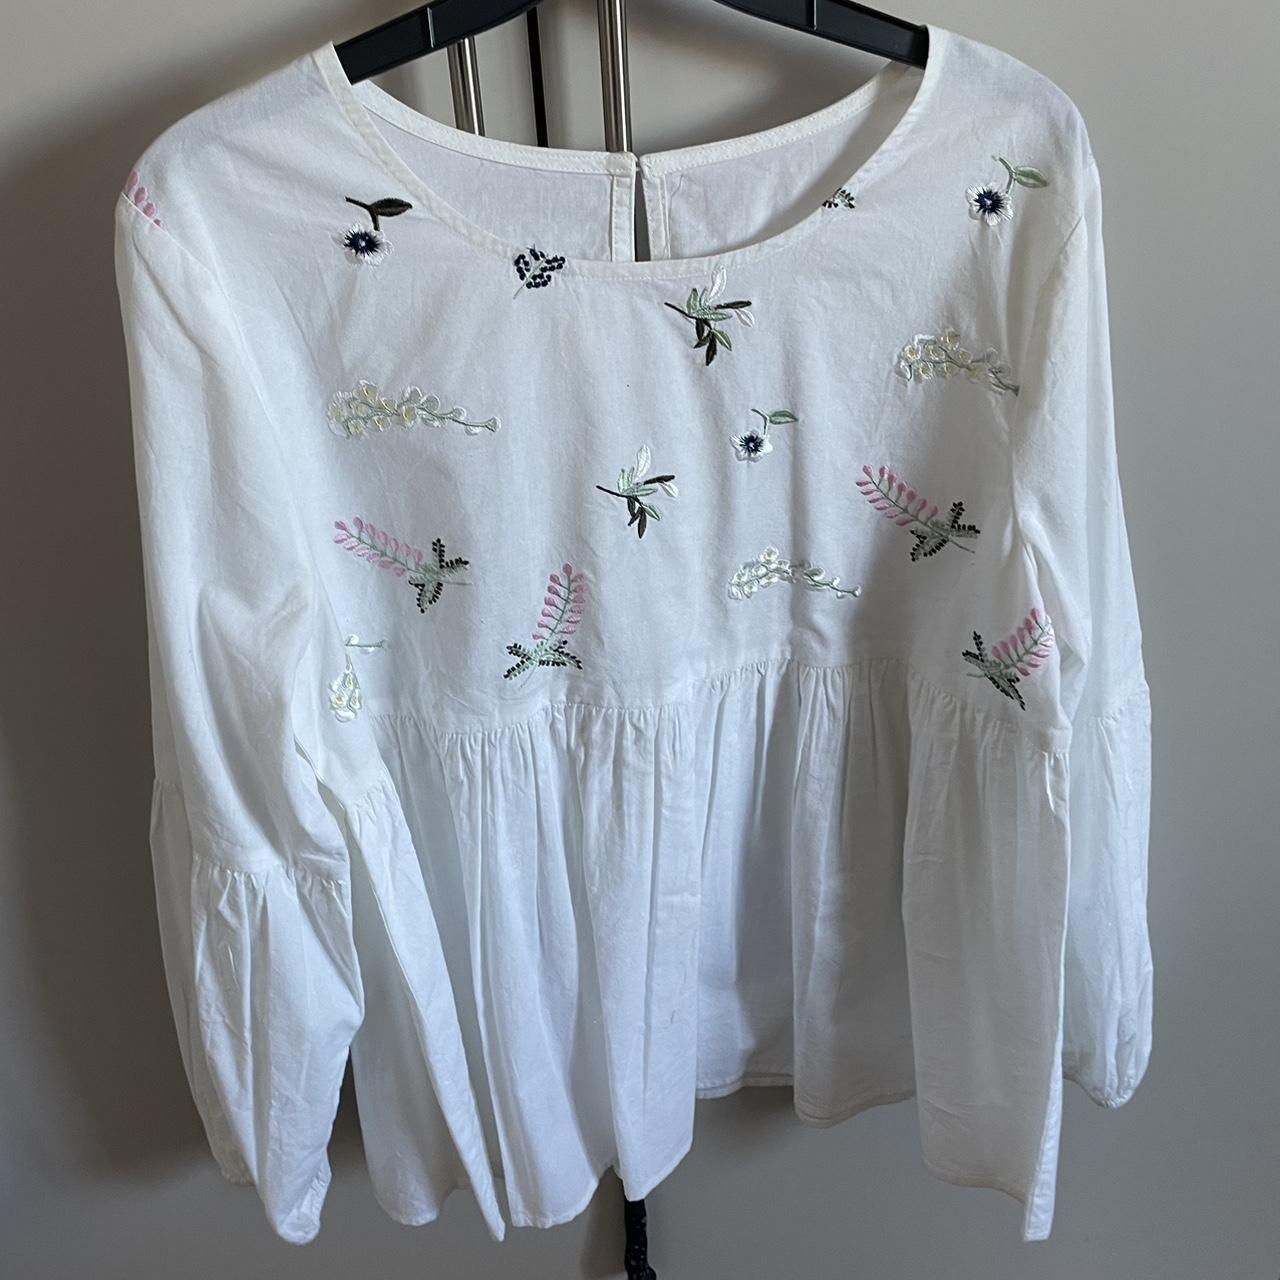 White leaf embroidery 100% cotton top. Puffy arms,... - Depop